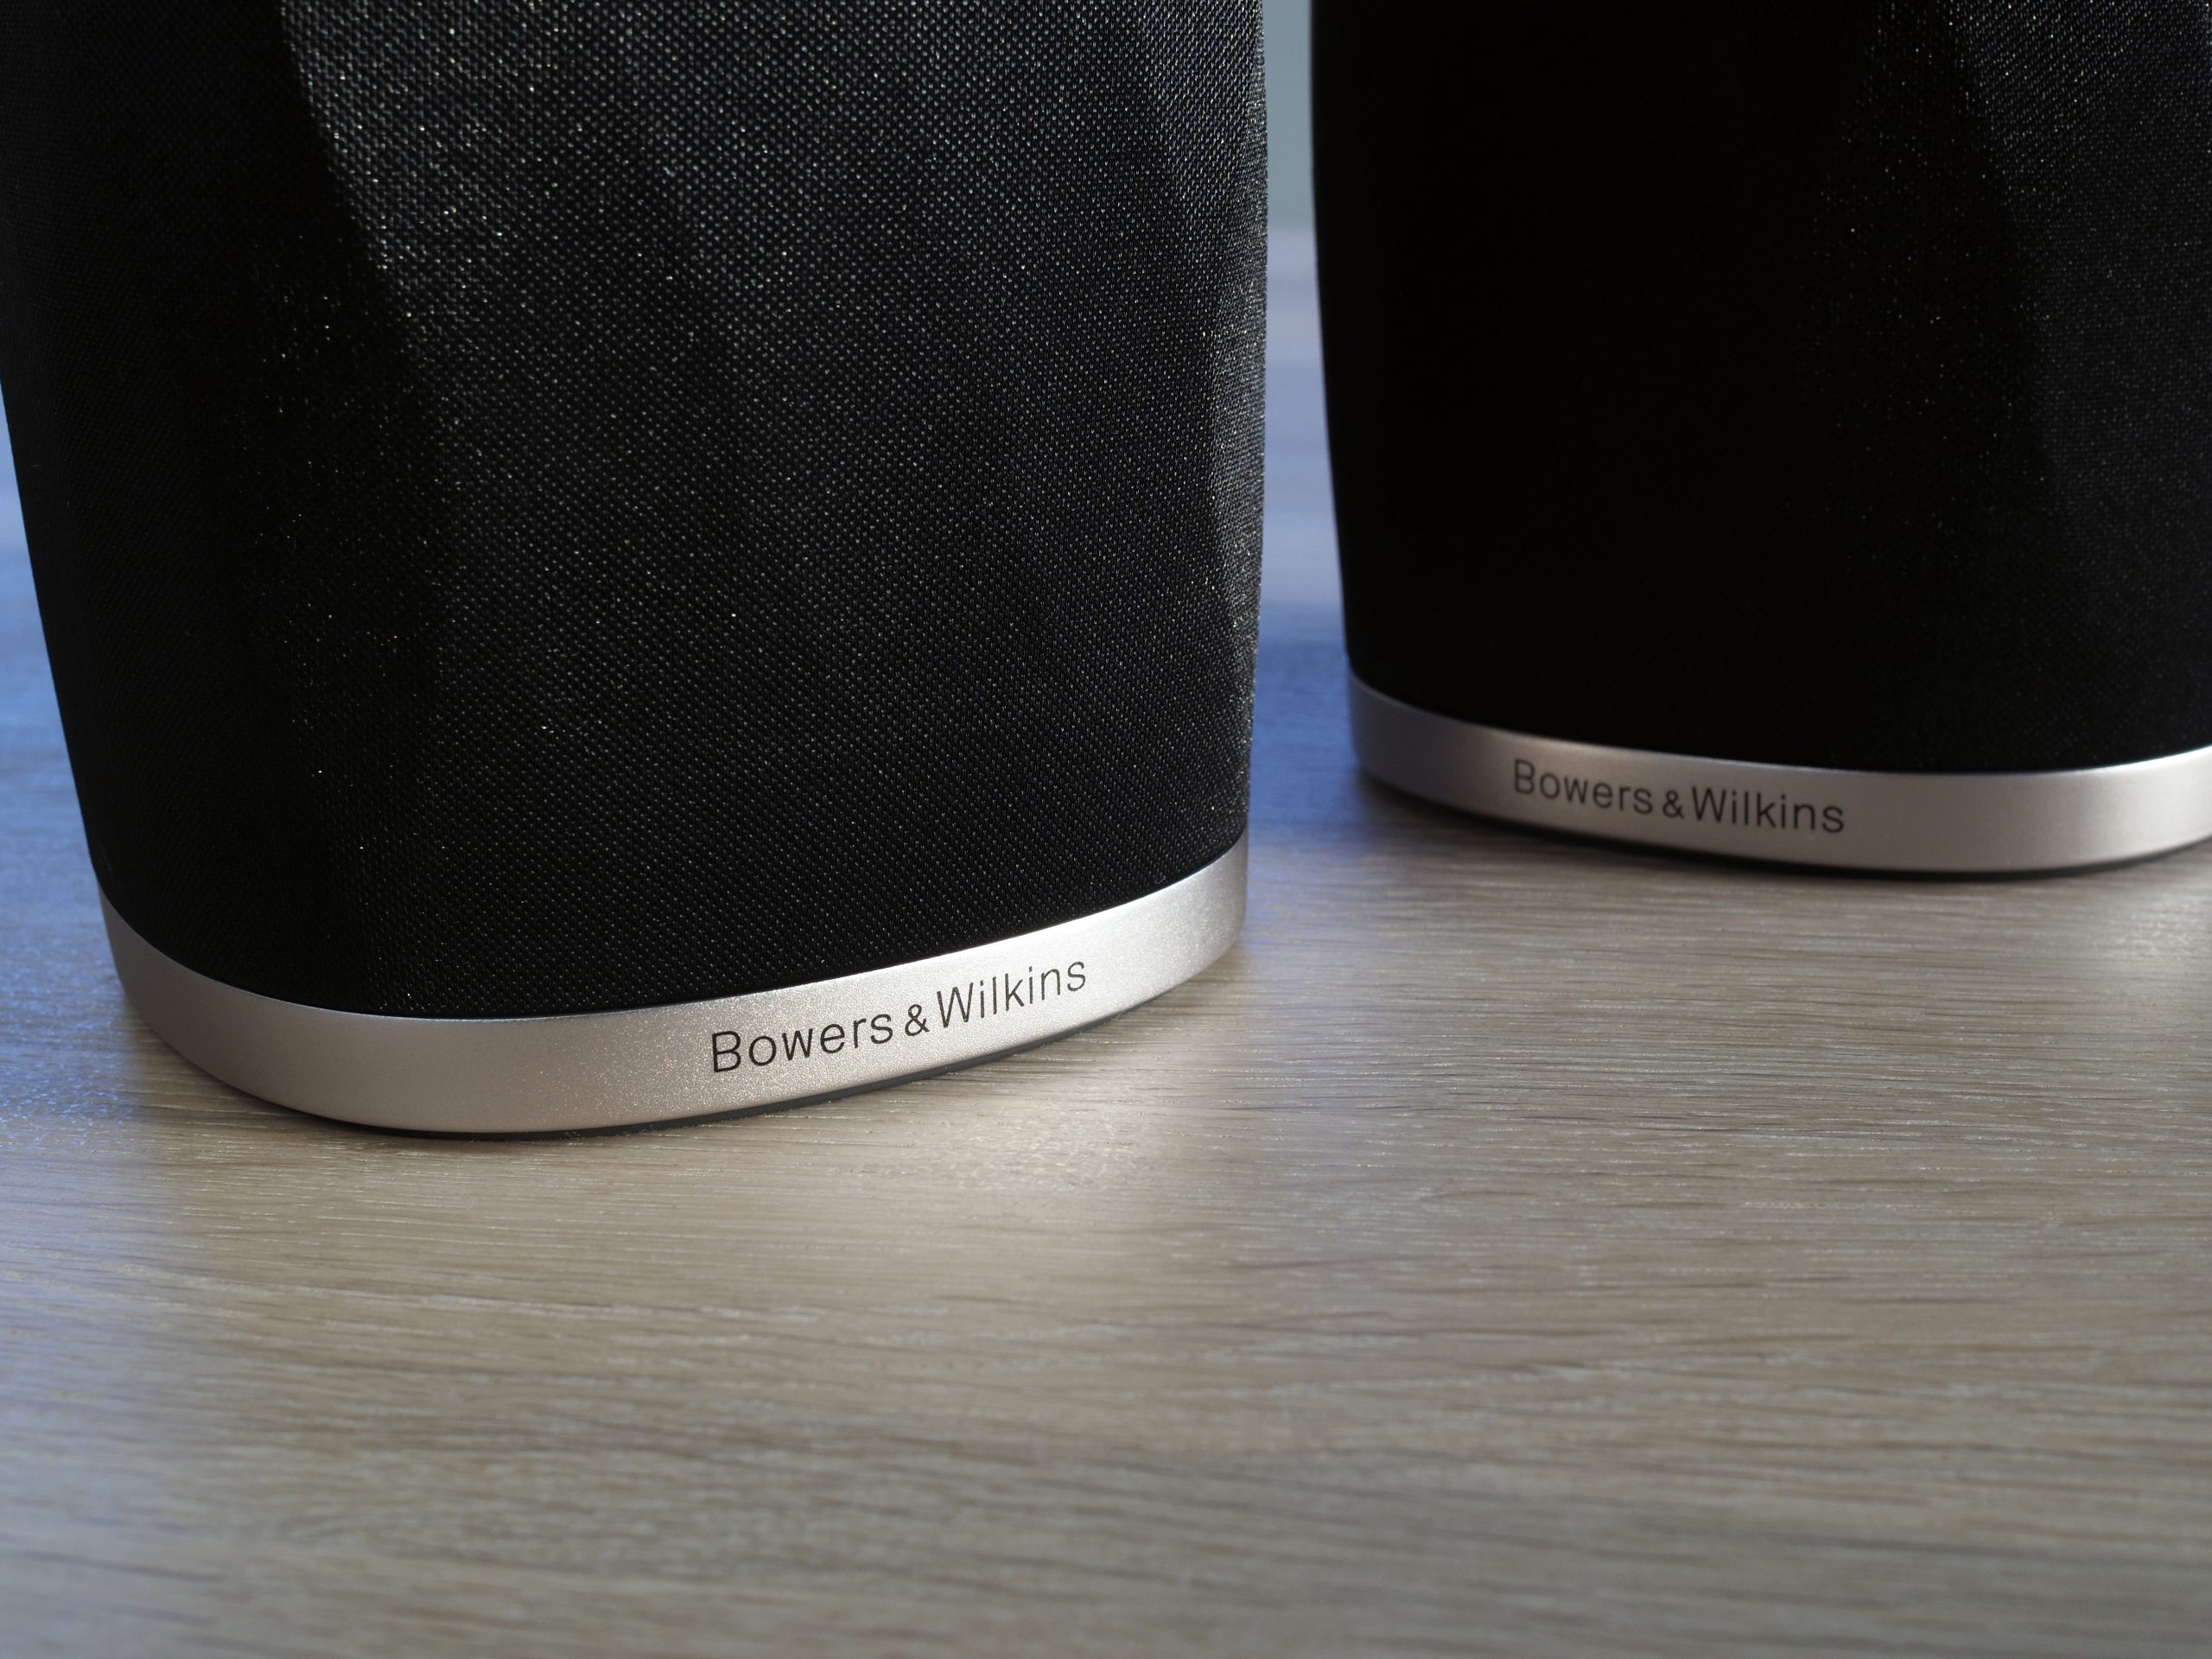 Floreren Indirect Medisch wangedrag Review: Bowers & Wilkins Formation Flex | Easy To Connect In Stereo Or  Multi-room